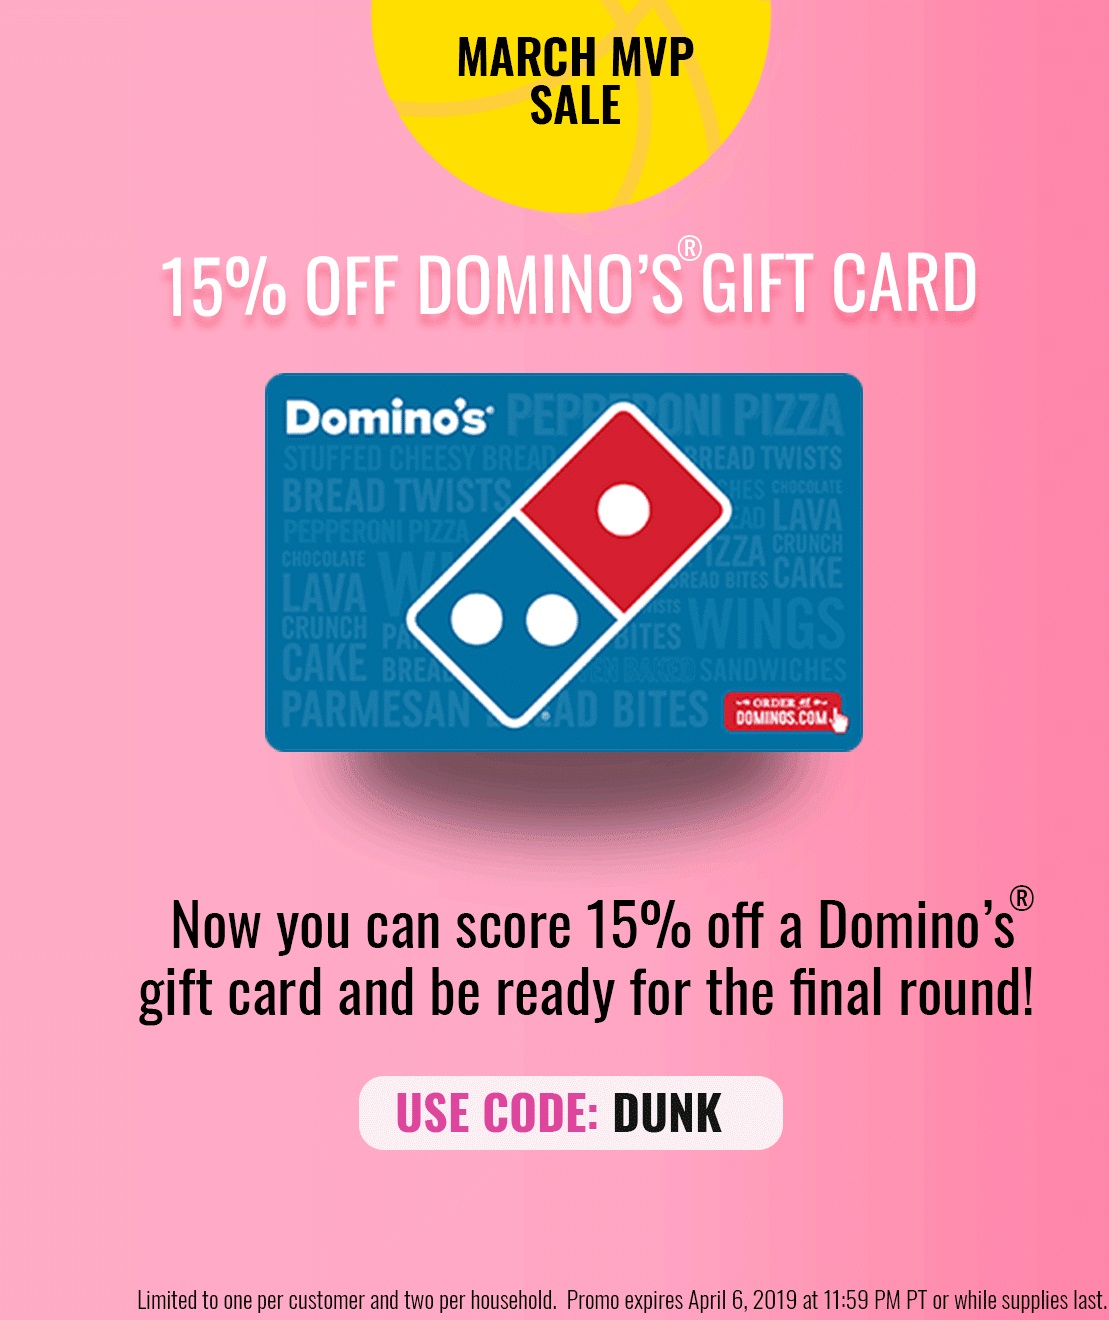 Expired Swych Save 15 On Domino S Gift Card With Promo Code